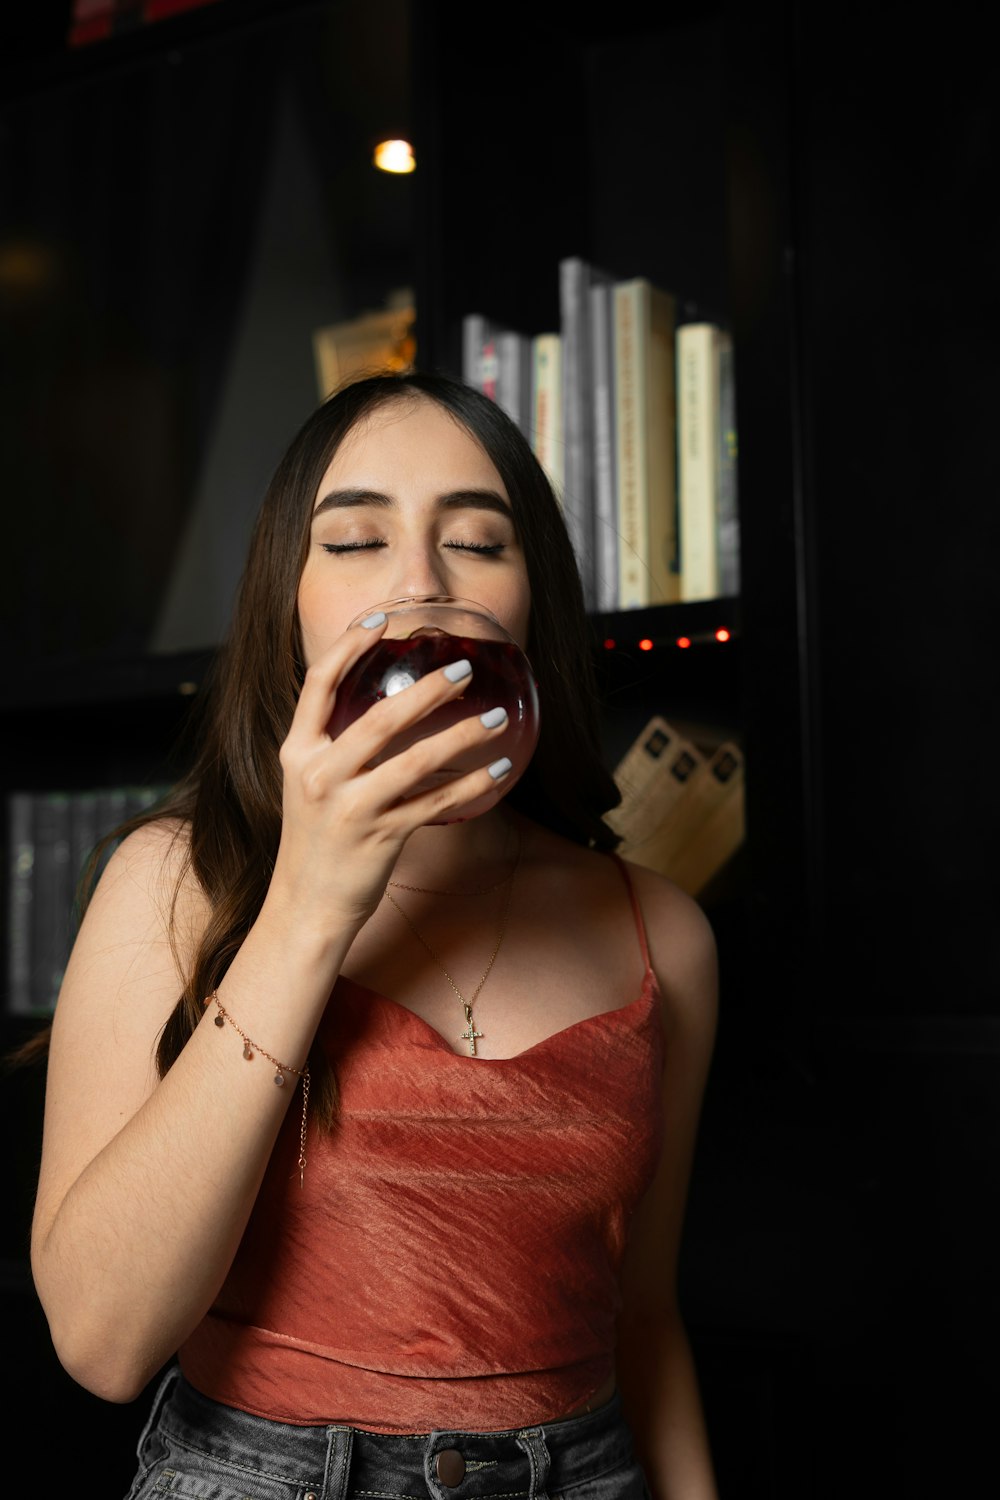 a woman drinking a glass of wine in front of a bookshelf